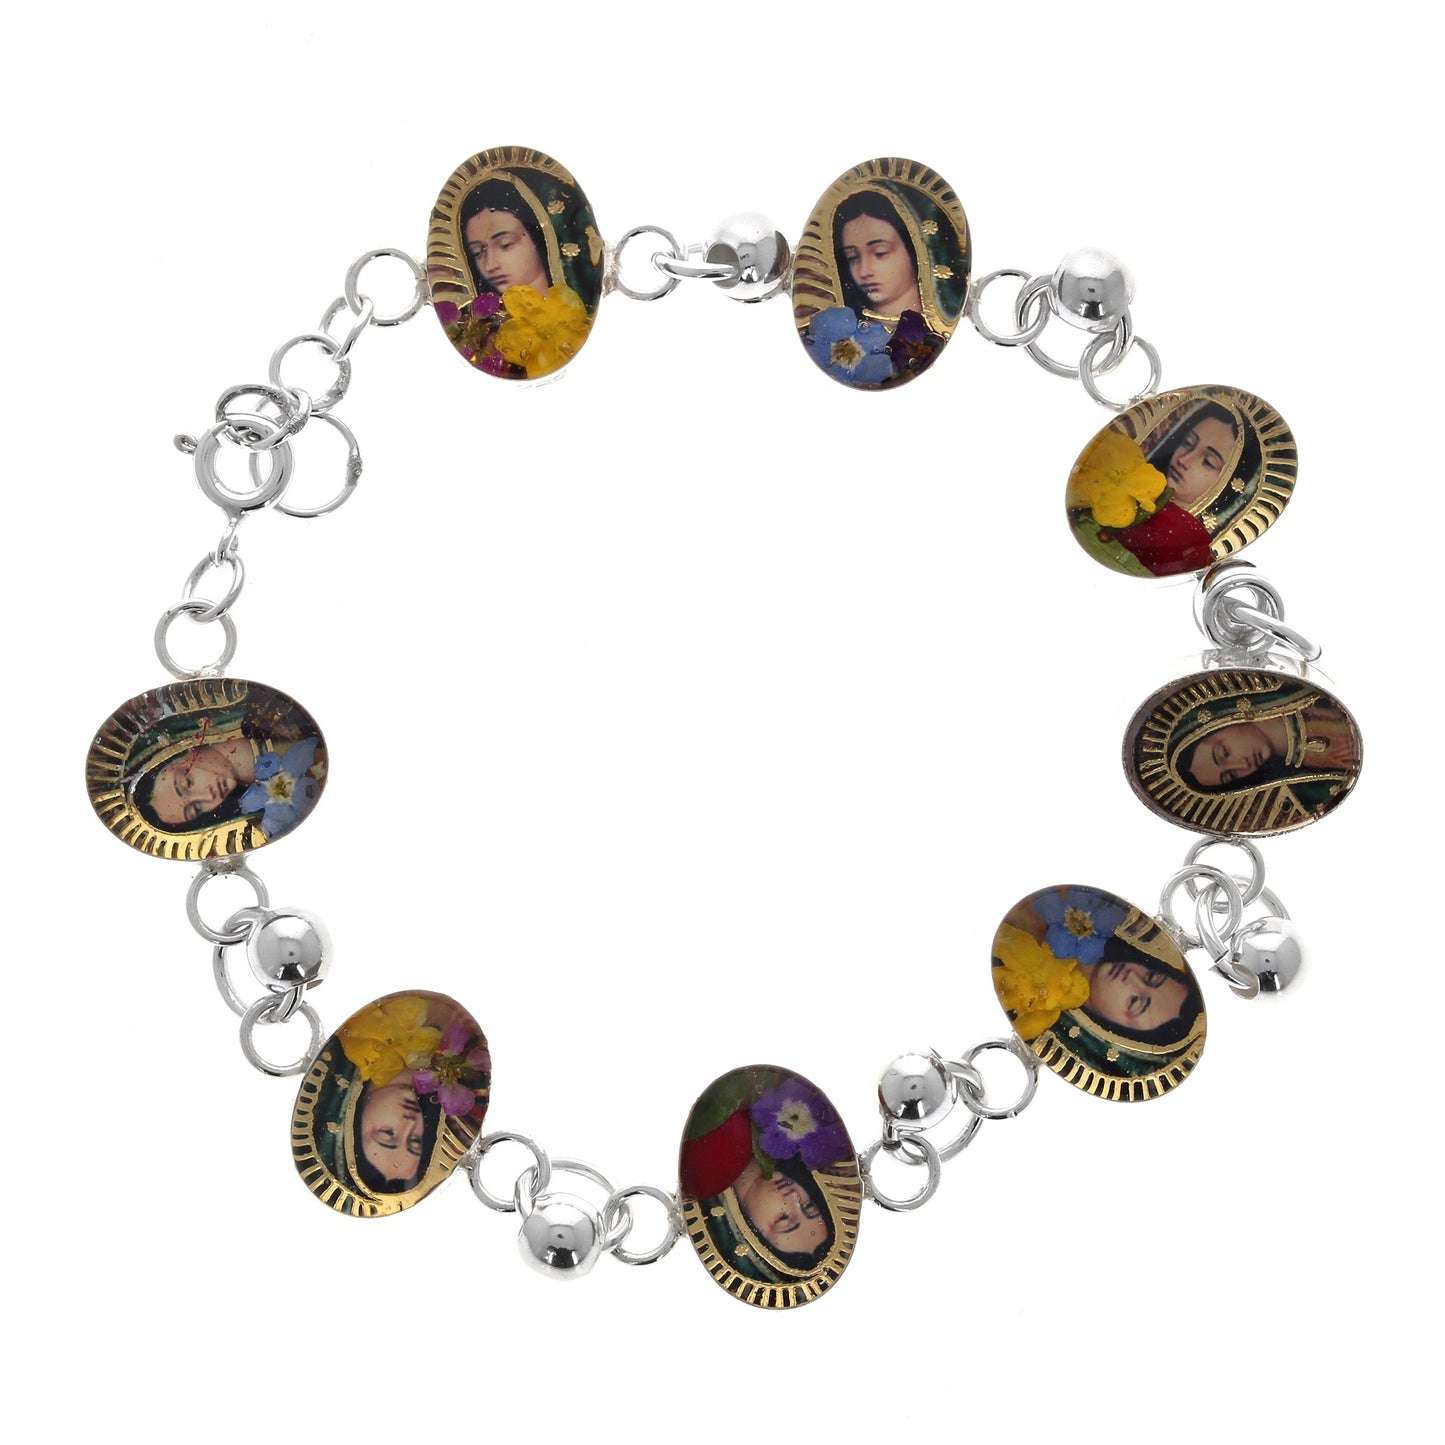 Our Lady of Guadalupe Linked Bracelet